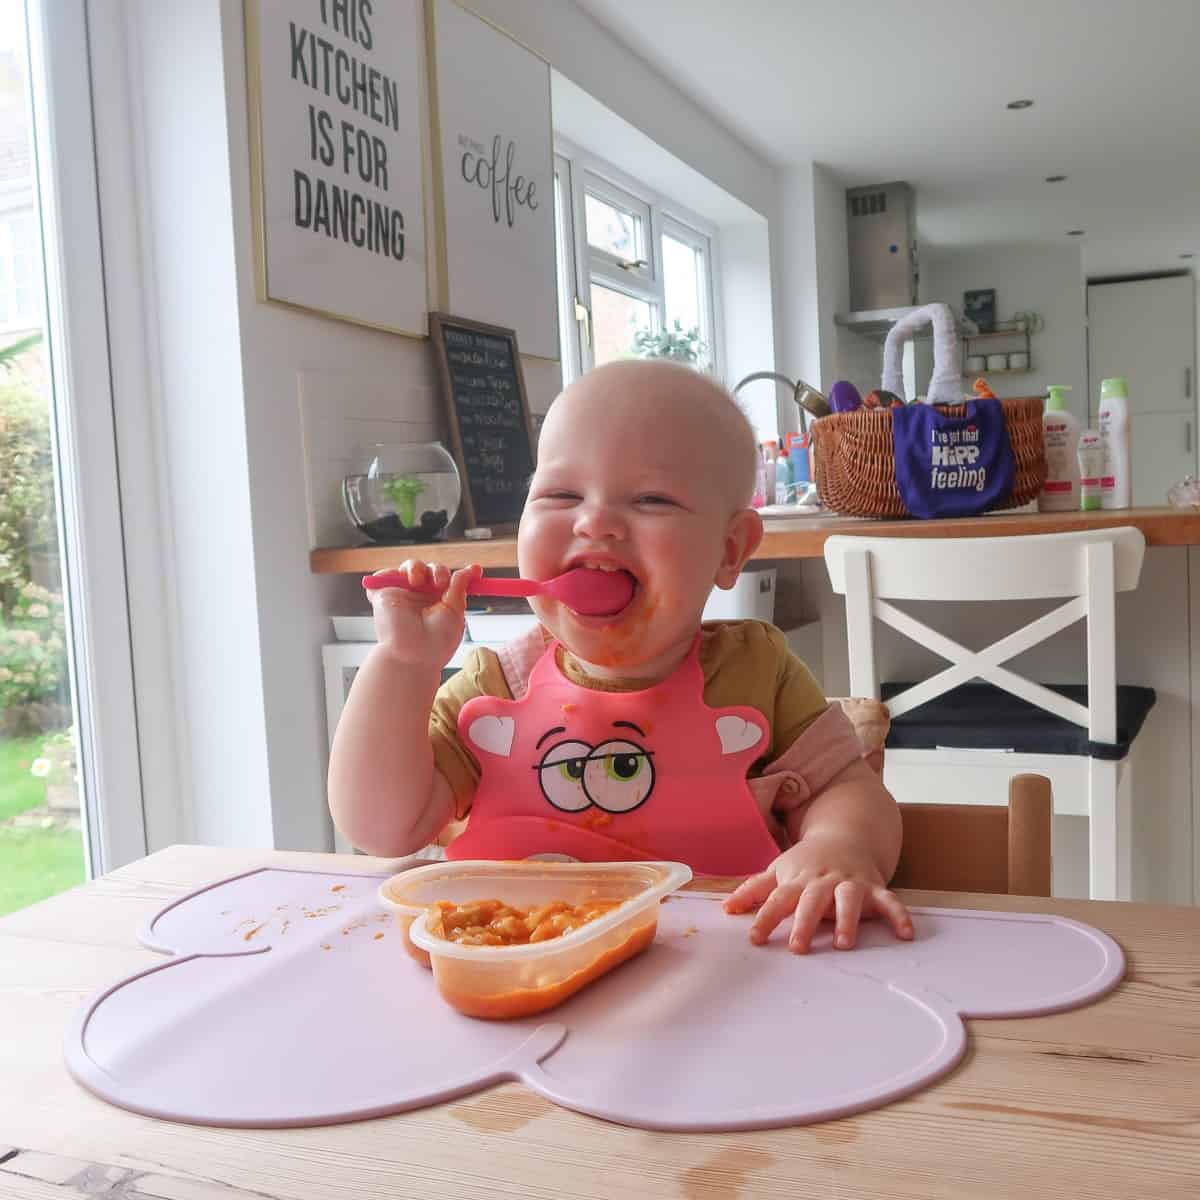 How to start weaning a baby - Roseyhome - weaning, purees, baby led weaning, puree feeding, baby's first foods